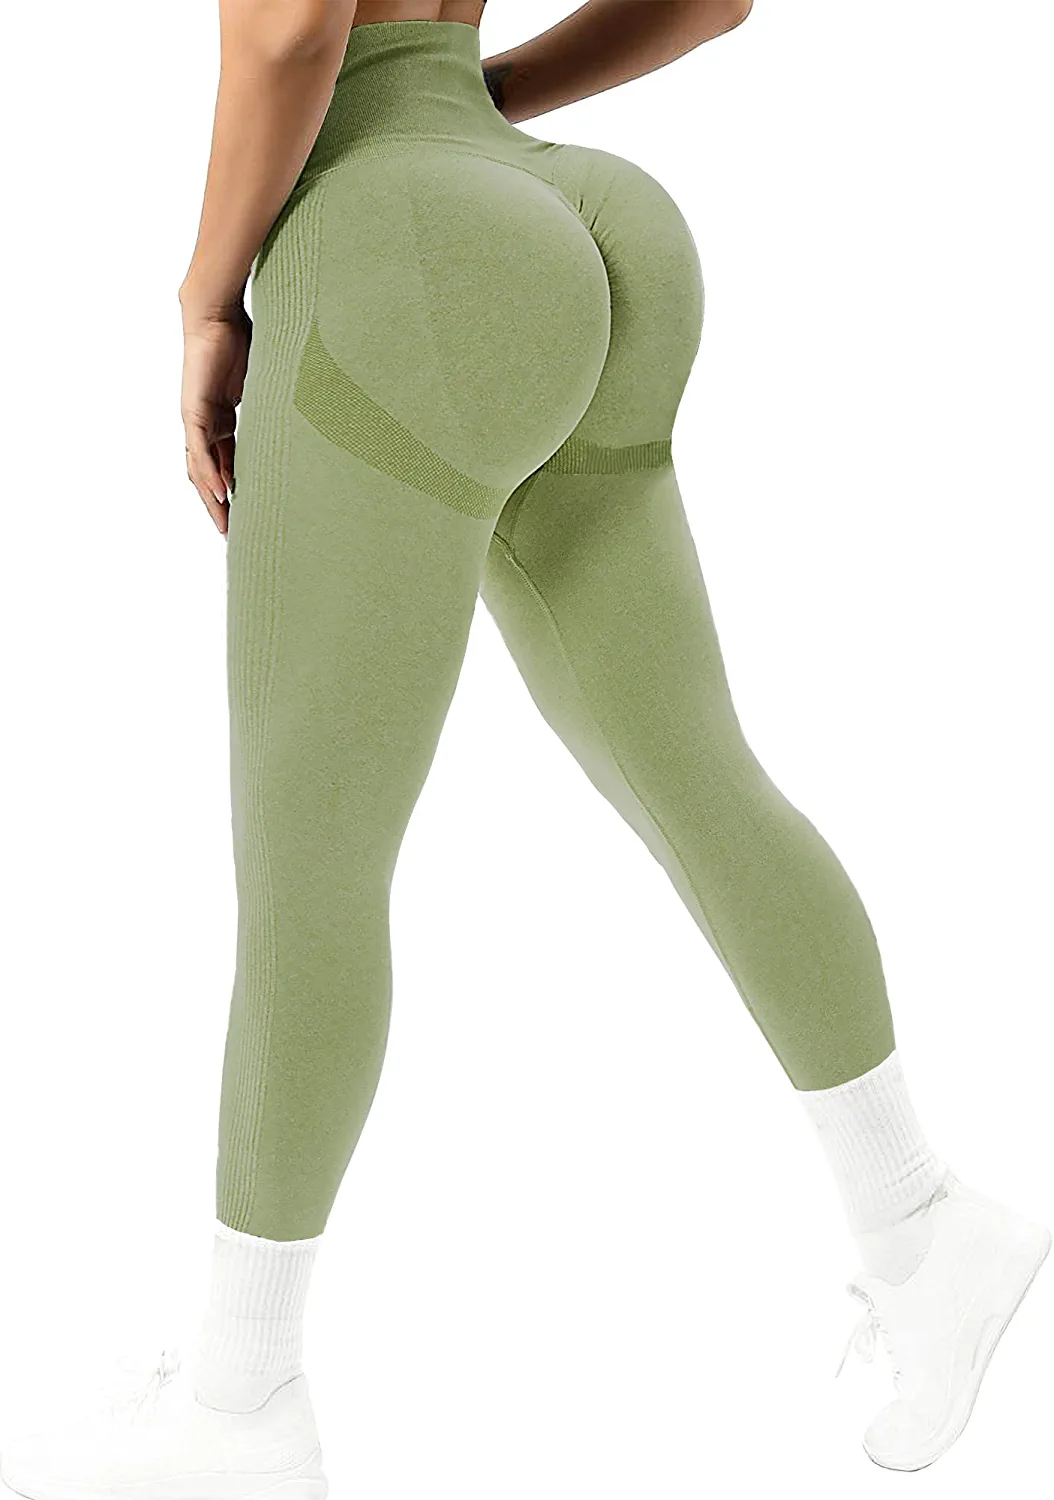 COMFREE Womens Yoga Pants Tummy Control Tights Butt Lifter Casual Gym  Leggings High Waisted Workout Pants 